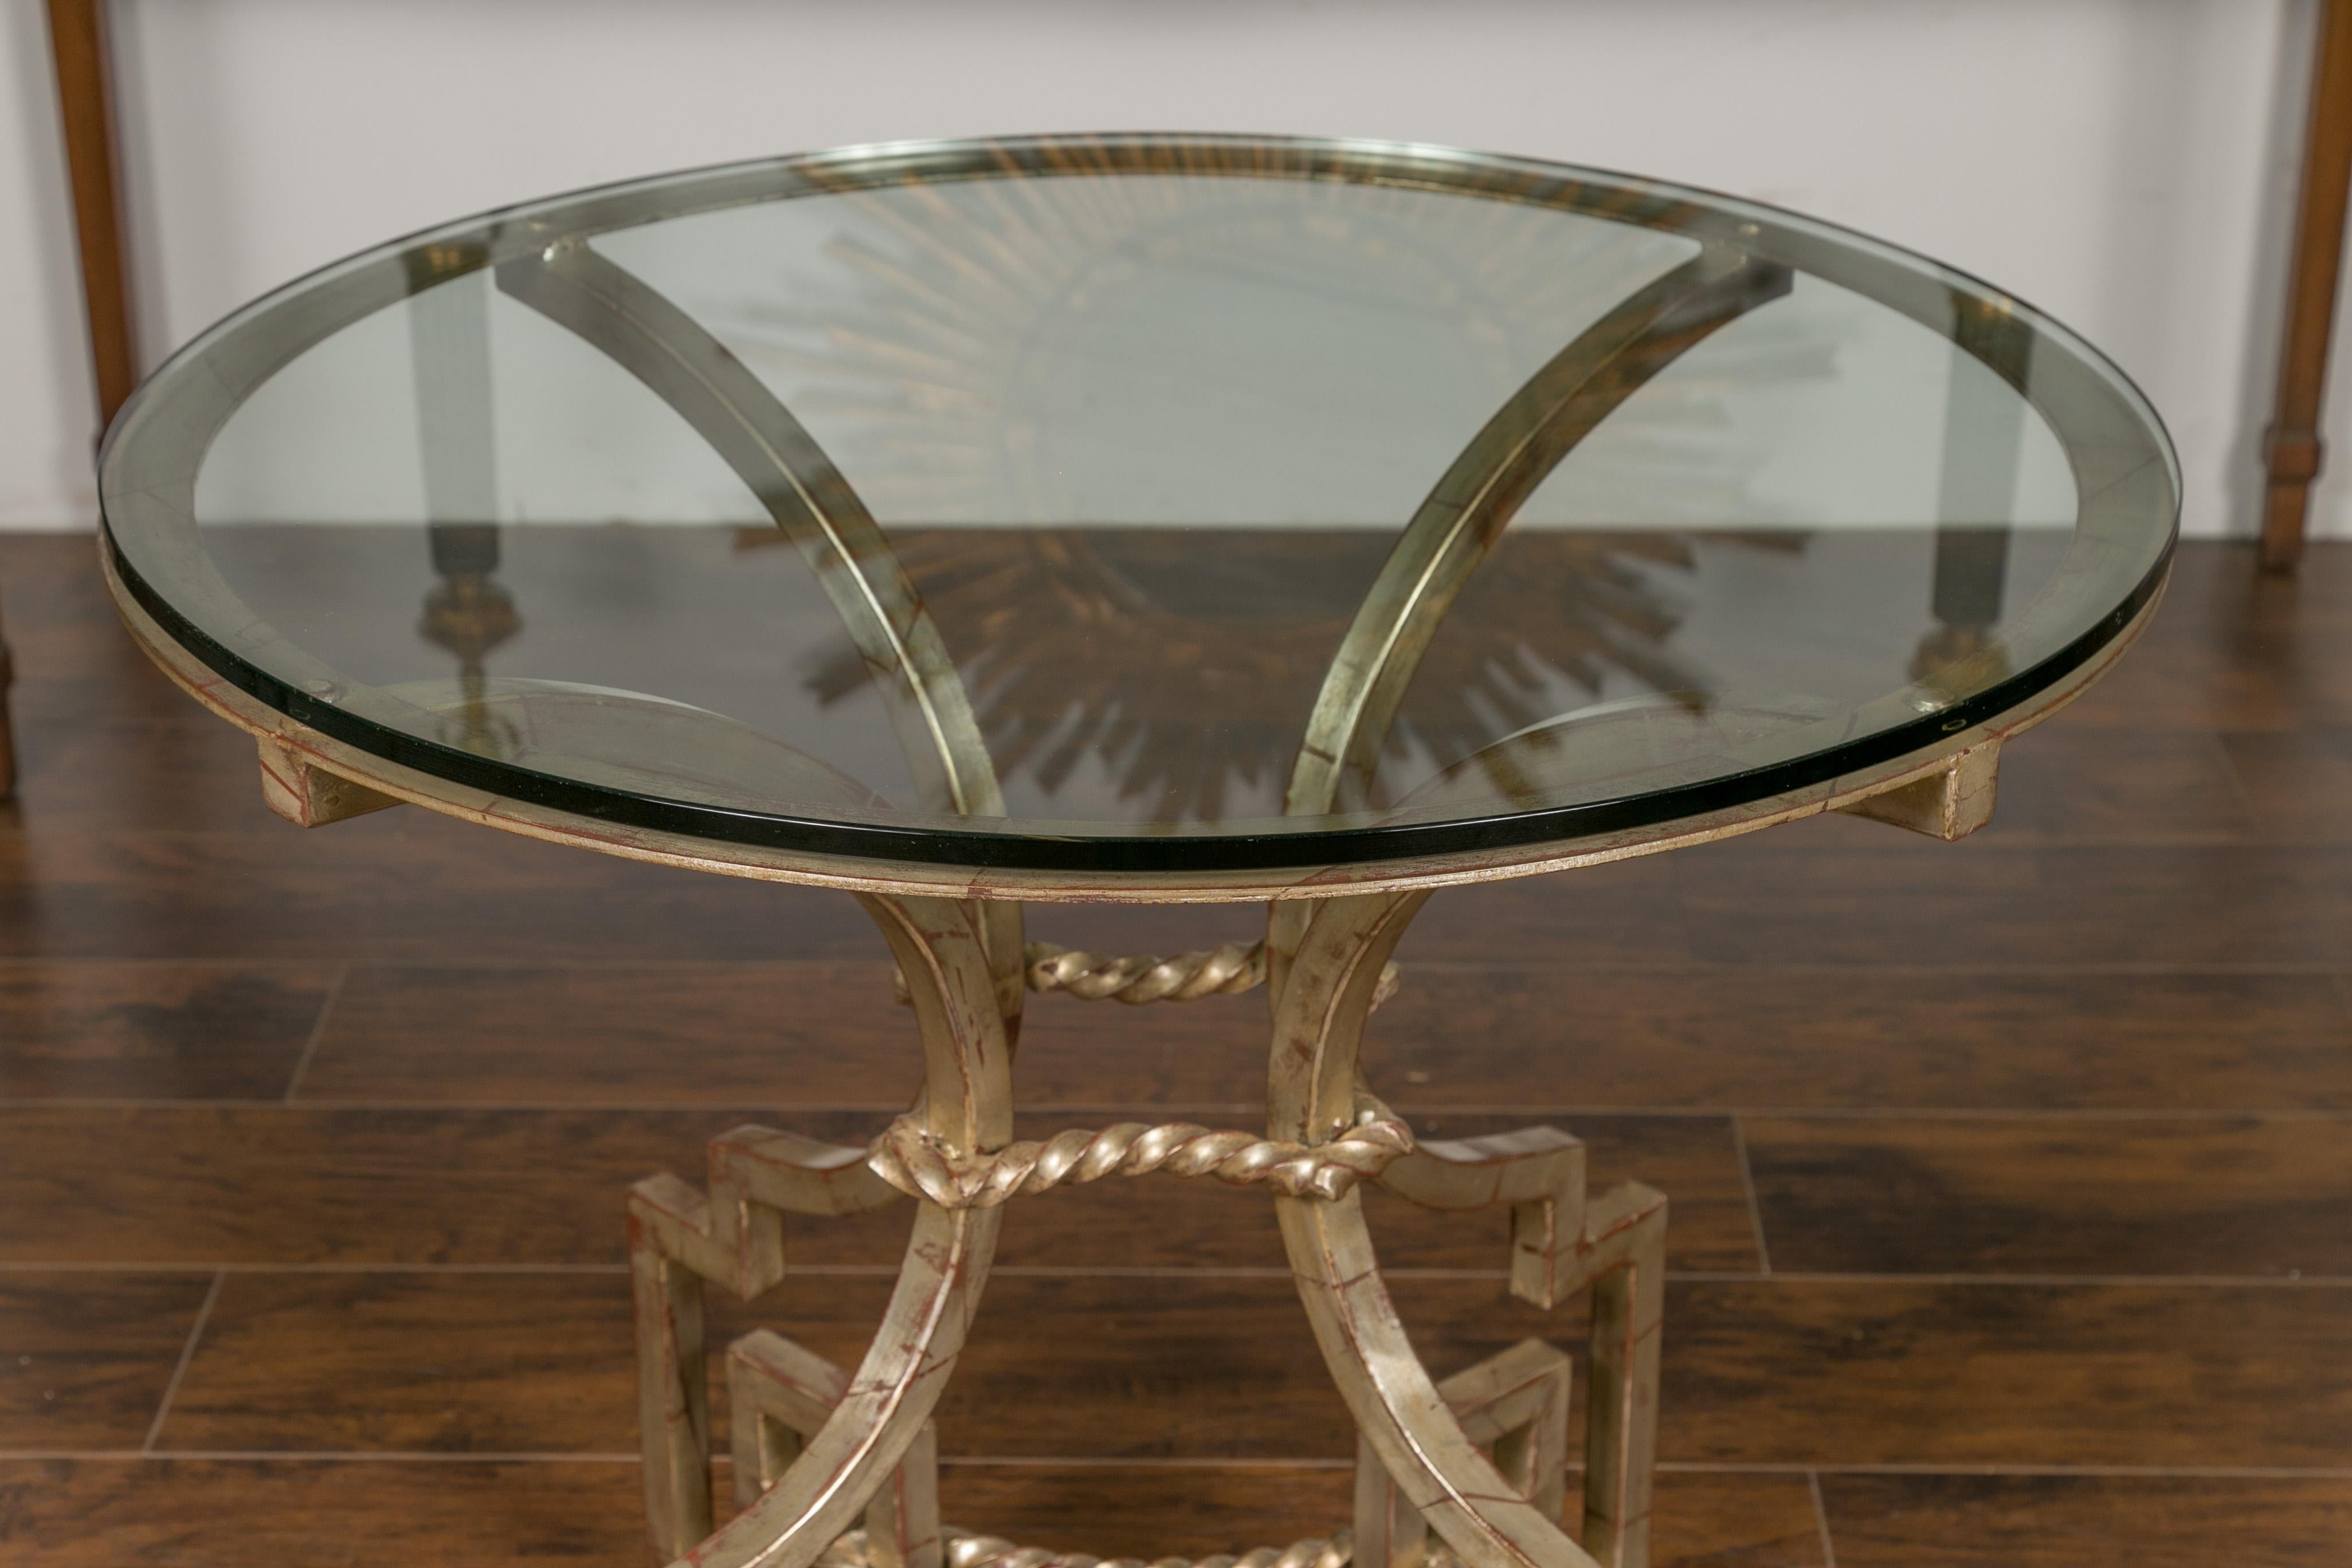 Midcentury French Silver Leaf Iron Table with Glass Top and Greek Key Motifs In Good Condition For Sale In Atlanta, GA